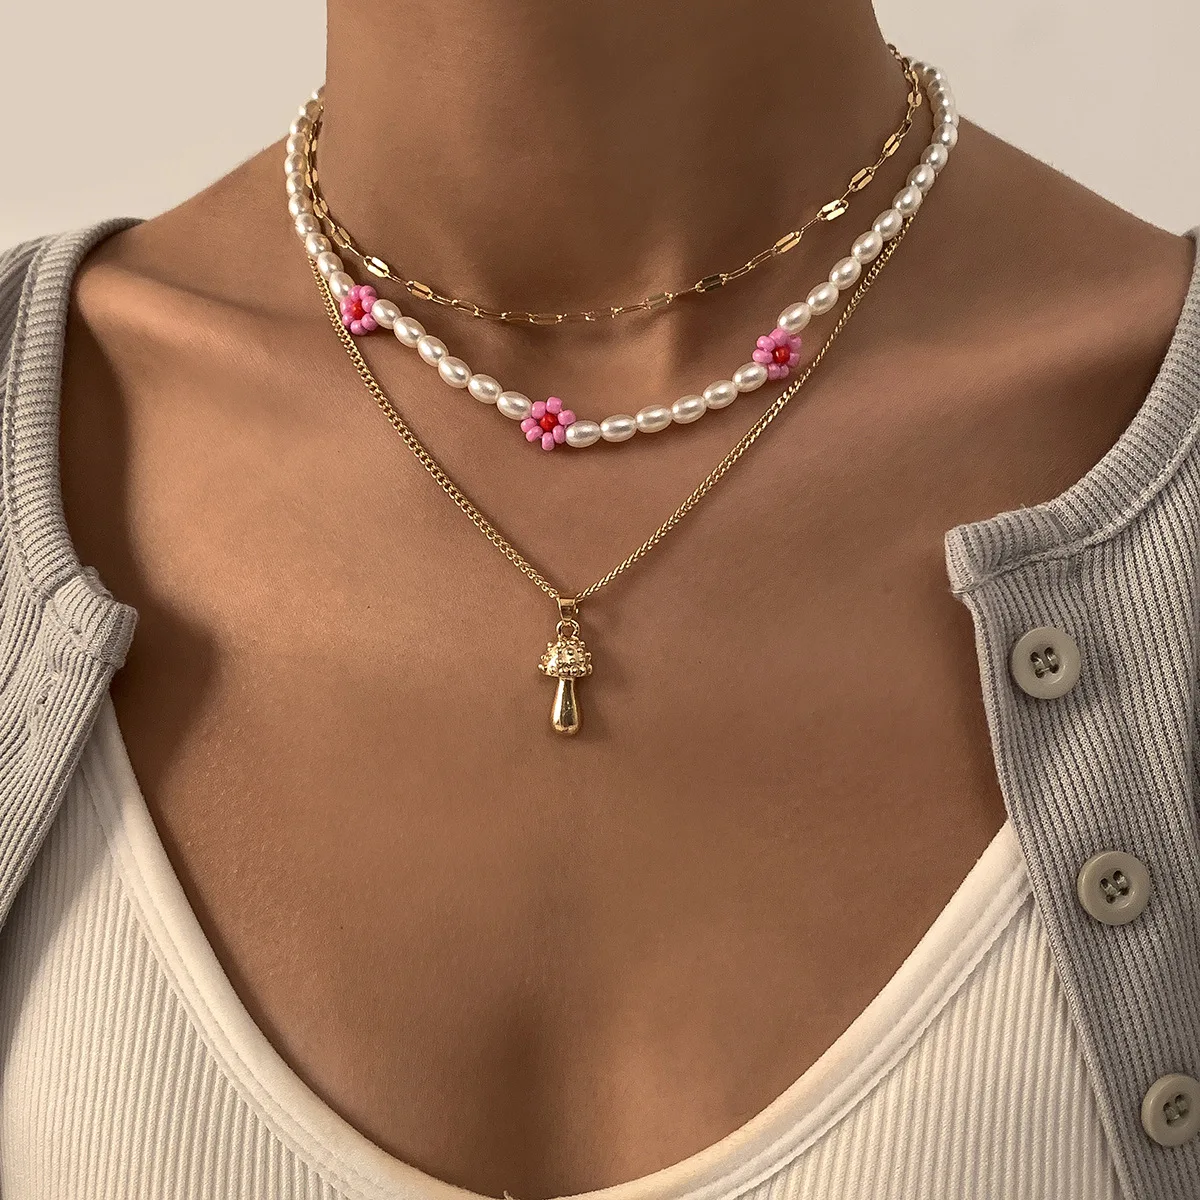 

NK-1101 Bohemian Cute Choker Necklace for Women Mushroom Pendants Statement Chain Necklace Layered Jewelry Gift, As show picture